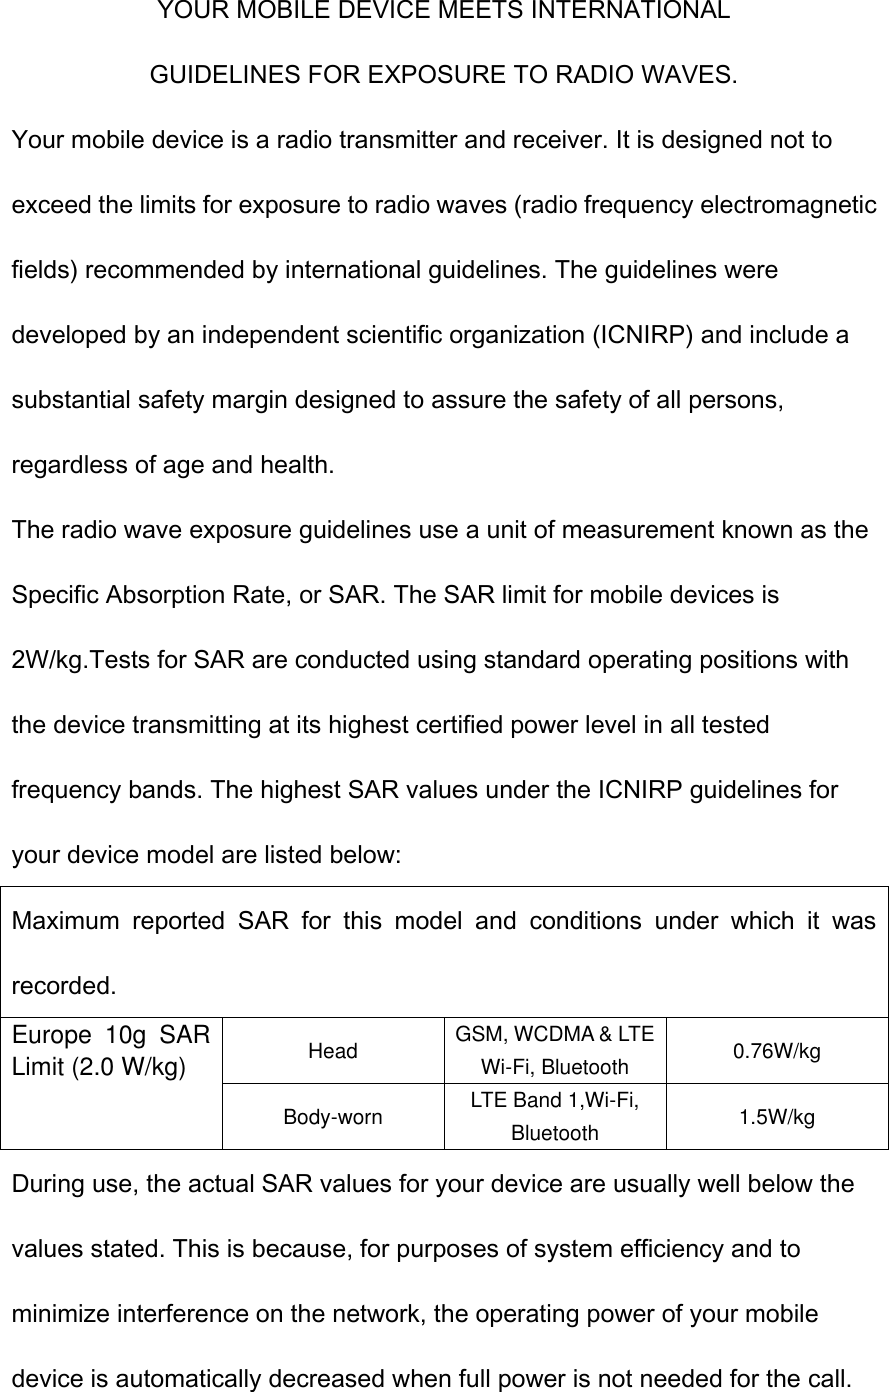 YOUR MOBILE DEVICE MEETS INTERNATIONAL GUIDELINES FOR EXPOSURE TO RADIO WAVES. Your mobile device is a radio transmitter and receiver. It is designed not to exceed the limits for exposure to radio waves (radio frequency electromagnetic fields) recommended by international guidelines. The guidelines were developed by an independent scientific organization (ICNIRP) and include a substantial safety margin designed to assure the safety of all persons, regardless of age and health. The radio wave exposure guidelines use a unit of measurement known as the Specific Absorption Rate, or SAR. The SAR limit for mobile devices is 2W/kg.Tests for SAR are conducted using standard operating positions with the device transmitting at its highest certified power level in all tested frequency bands. The highest SAR values under the ICNIRP guidelines for your device model are listed below: Maximum  reported  SAR  for  this  model  and  conditions  under  which  it  was recorded. Europe  10g  SAR Limit (2.0 W/kg) Head GSM, WCDMA &amp; LTE Wi-Fi, Bluetooth 0.76W/kg Body-worn LTE Band 1,Wi-Fi, Bluetooth 1.5W/kg During use, the actual SAR values for your device are usually well below the values stated. This is because, for purposes of system efficiency and to minimize interference on the network, the operating power of your mobile device is automatically decreased when full power is not needed for the call. 